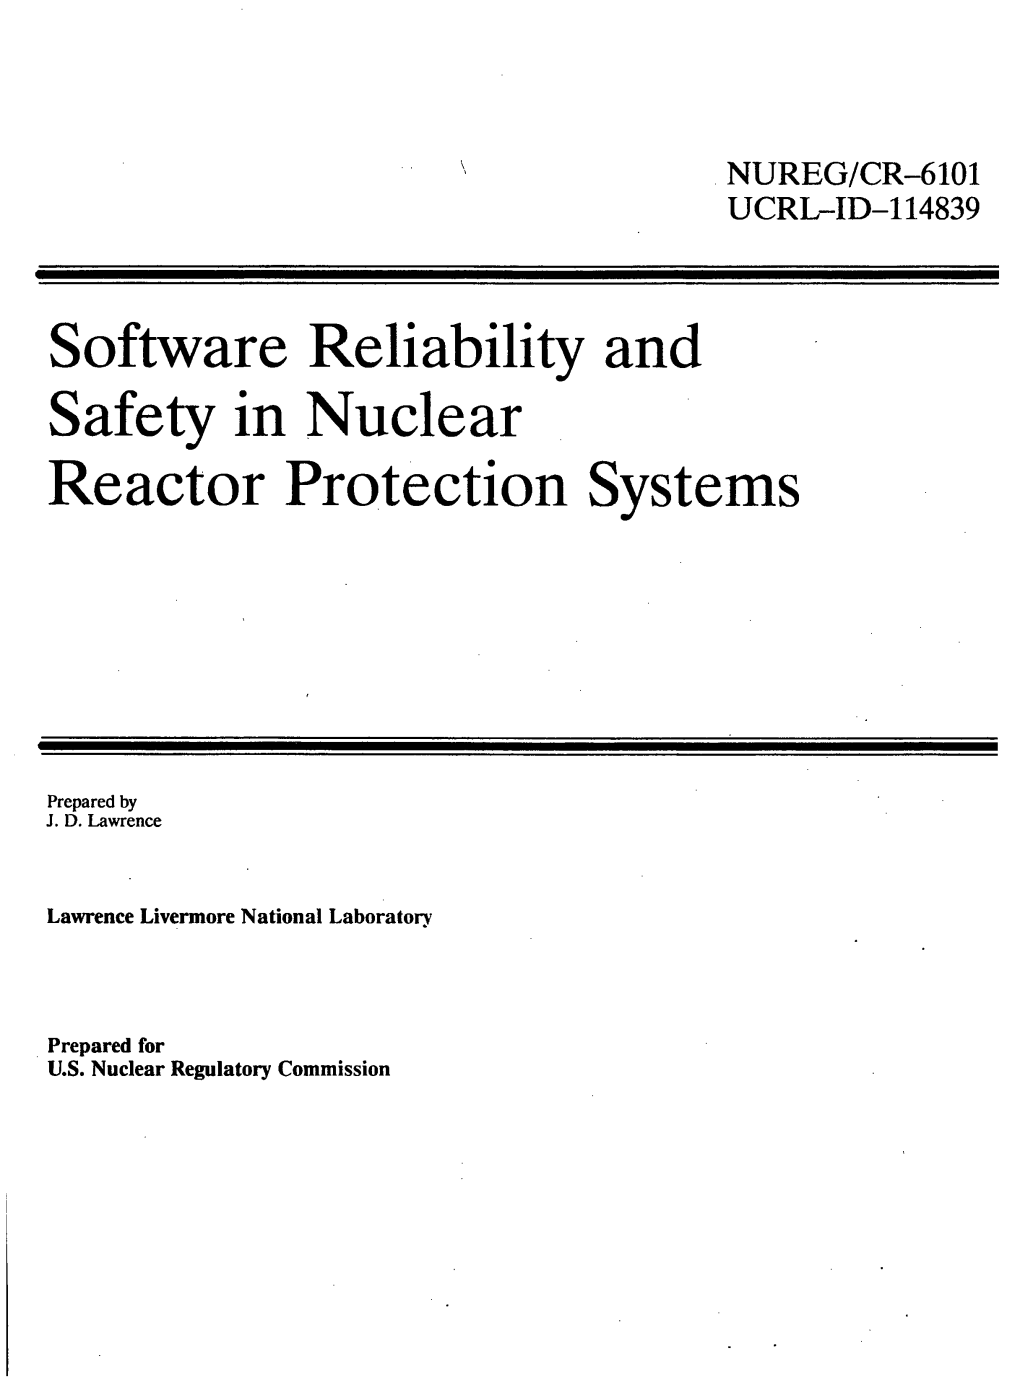 Software Reliability and Safety in Nuclear Reactor Protection Systems